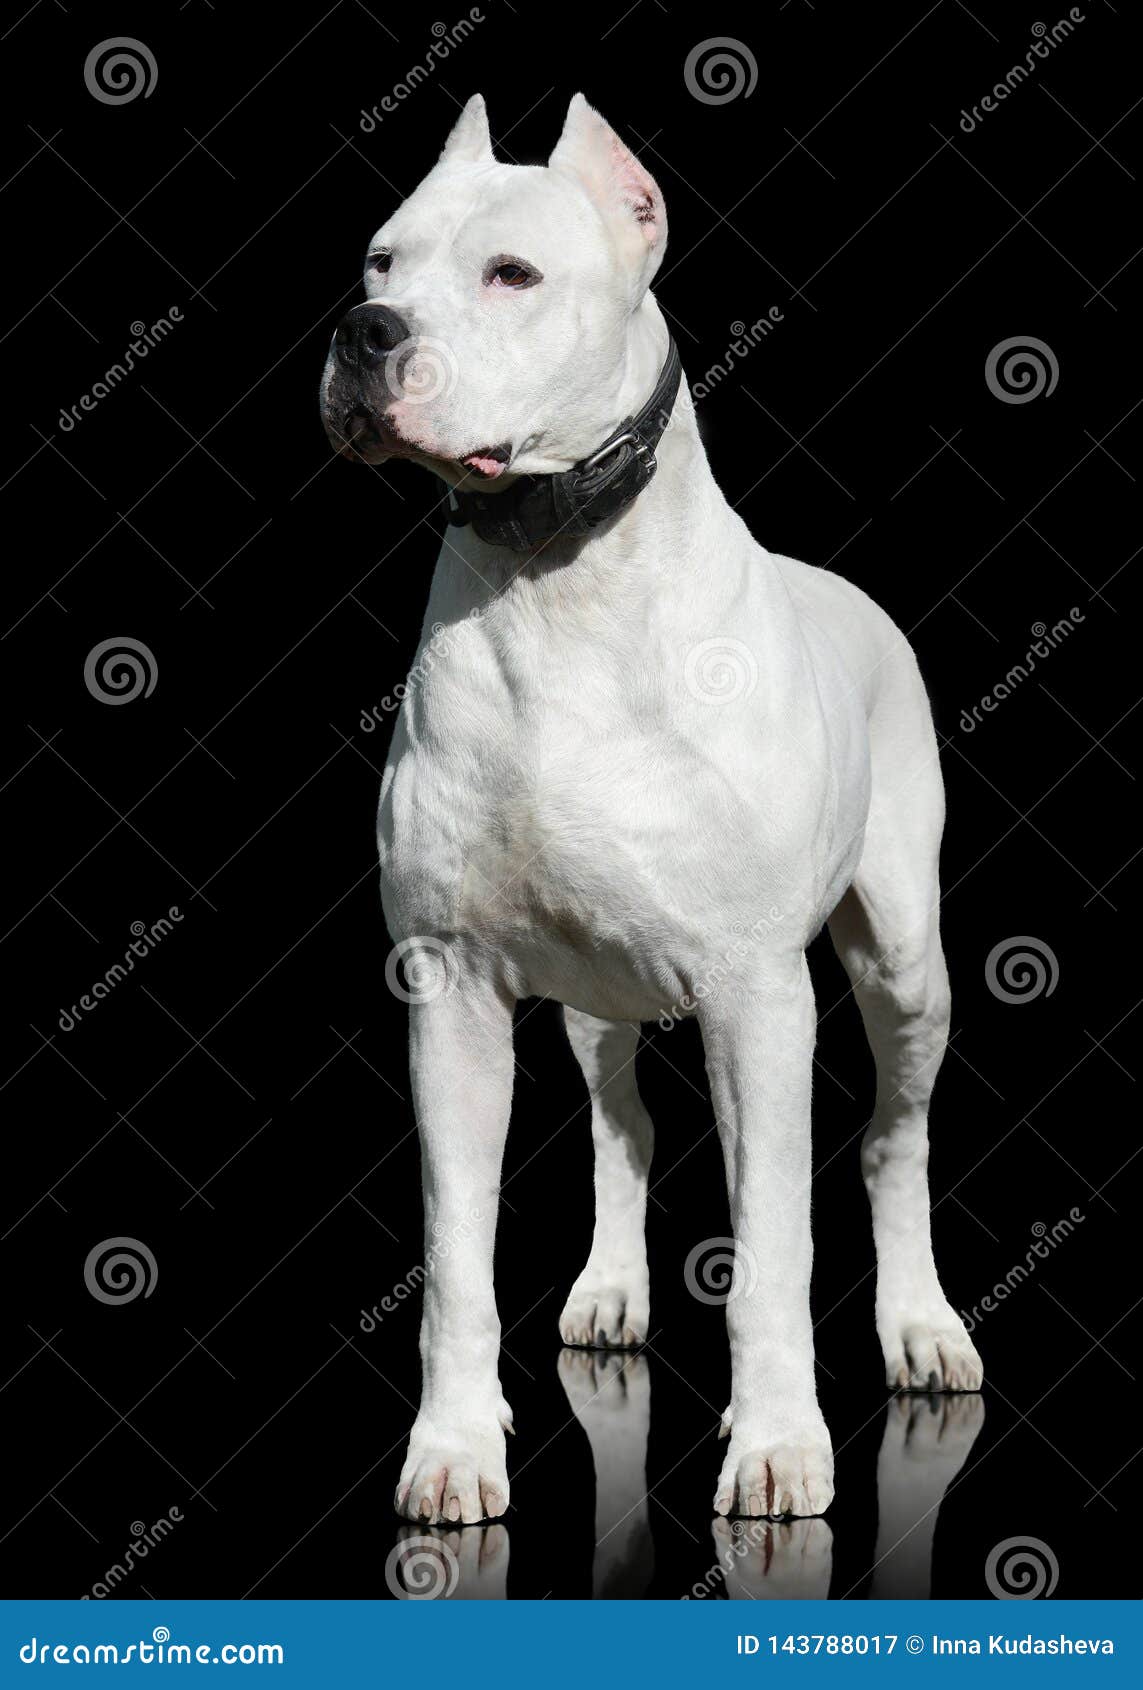 https://thumbs.dreamstime.com/z/white-dogo-argentino-male-stand-isolated-black-background-front-view-143788017.jpg